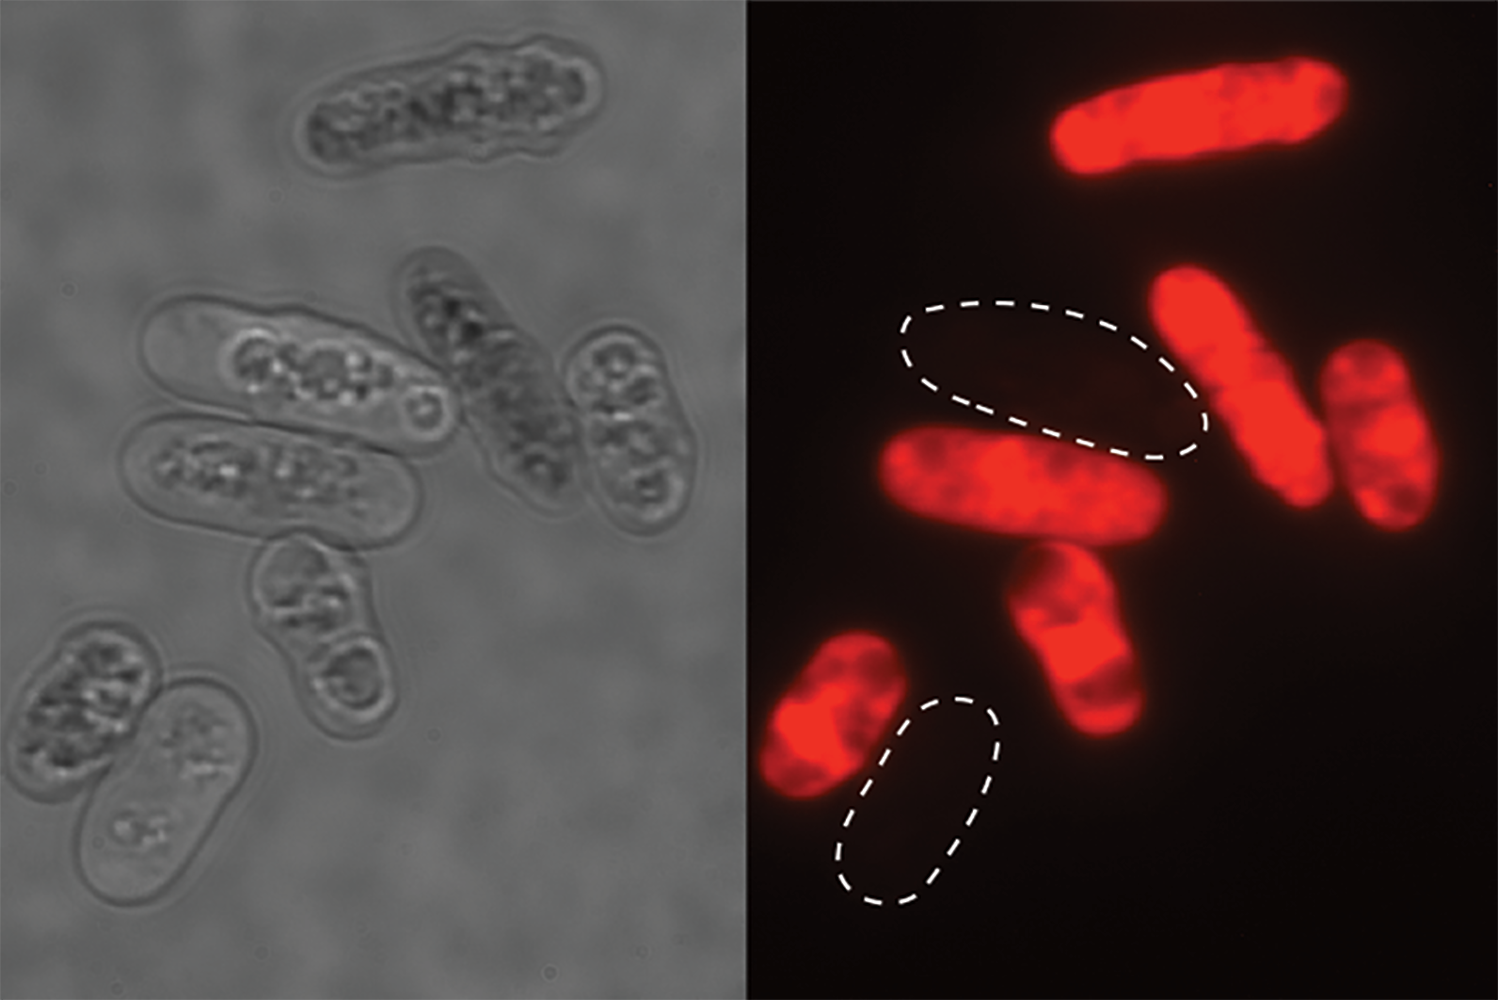 Poisoned yeast cells marked with a red dye against a black background.